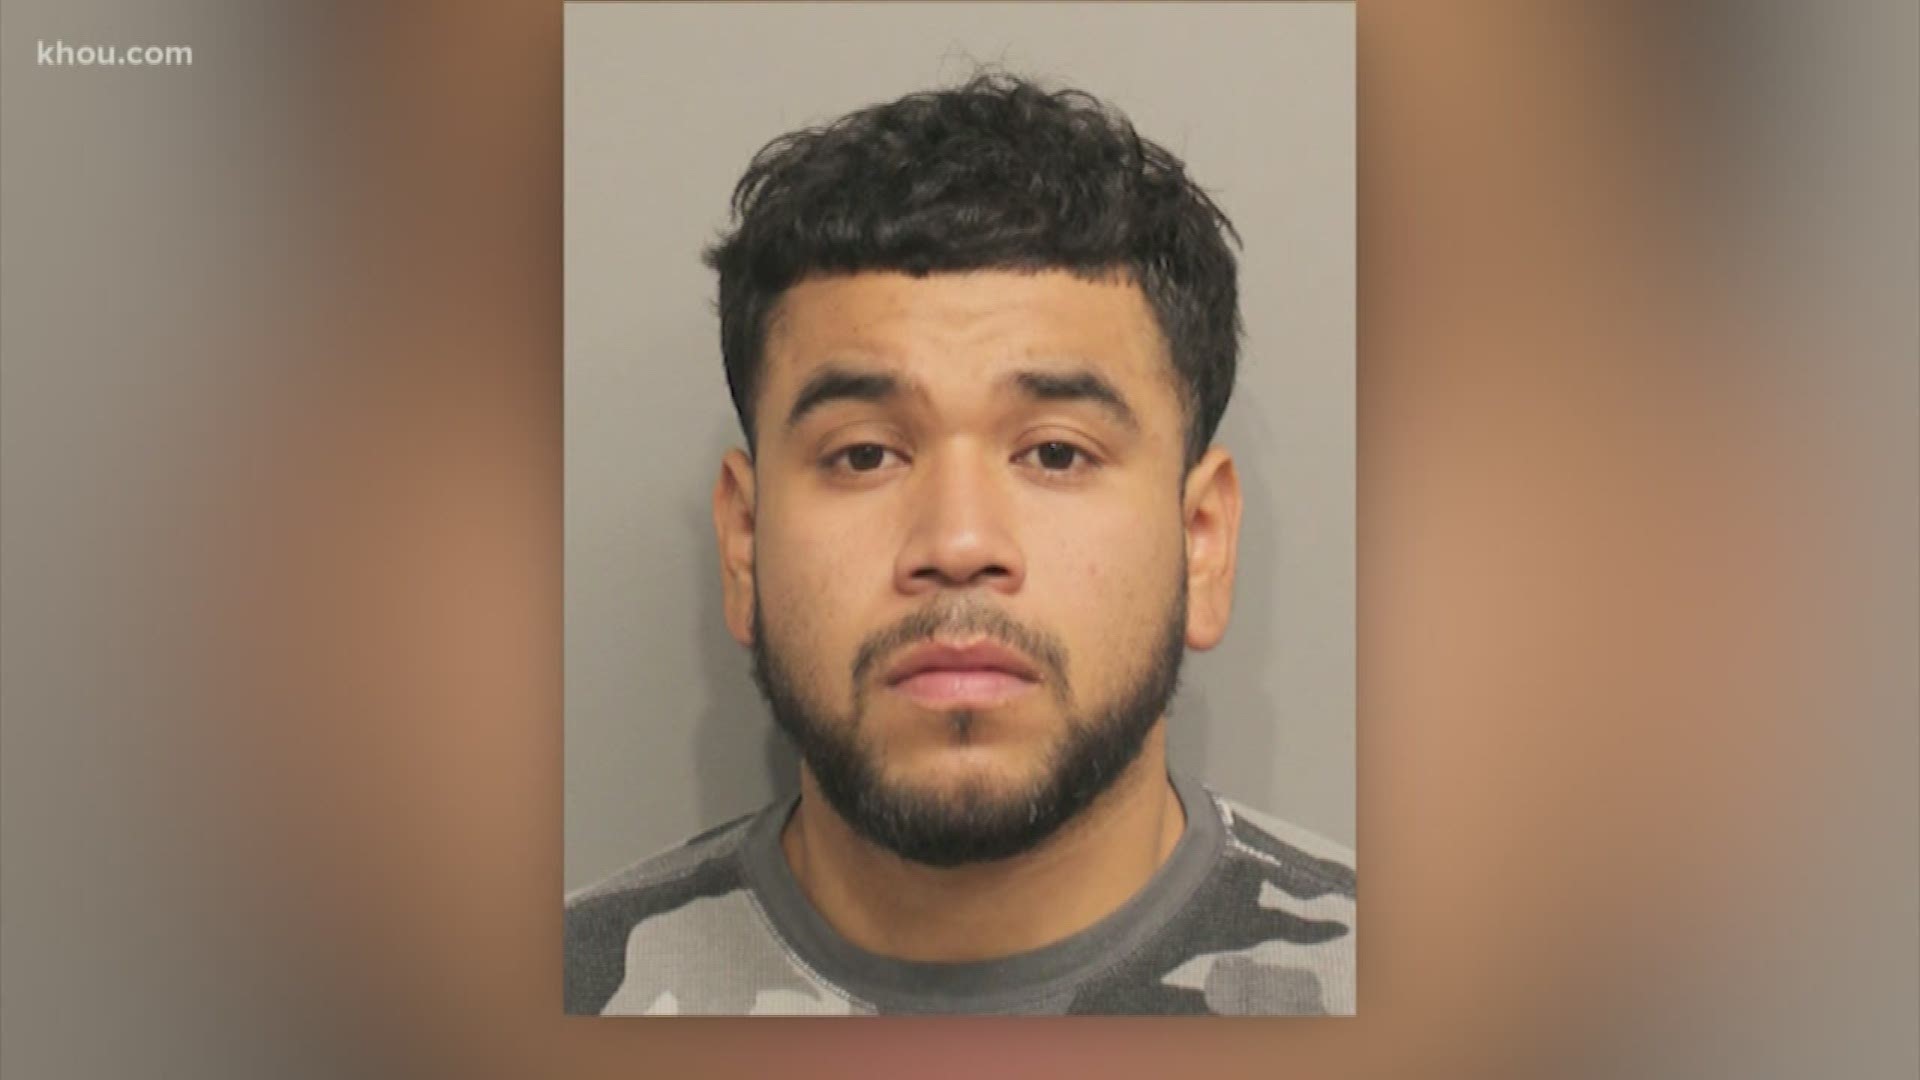 A father is charged with murder in his 2-week-old son's death. Baby Daniel Pacheco died in the hospital after suffering blunt force injuries to his skull, stomach and groin. His father, 27-year-old Luis Pacheco, is charged in the baby's death. He claims he dropped Daniel while he was changing him.